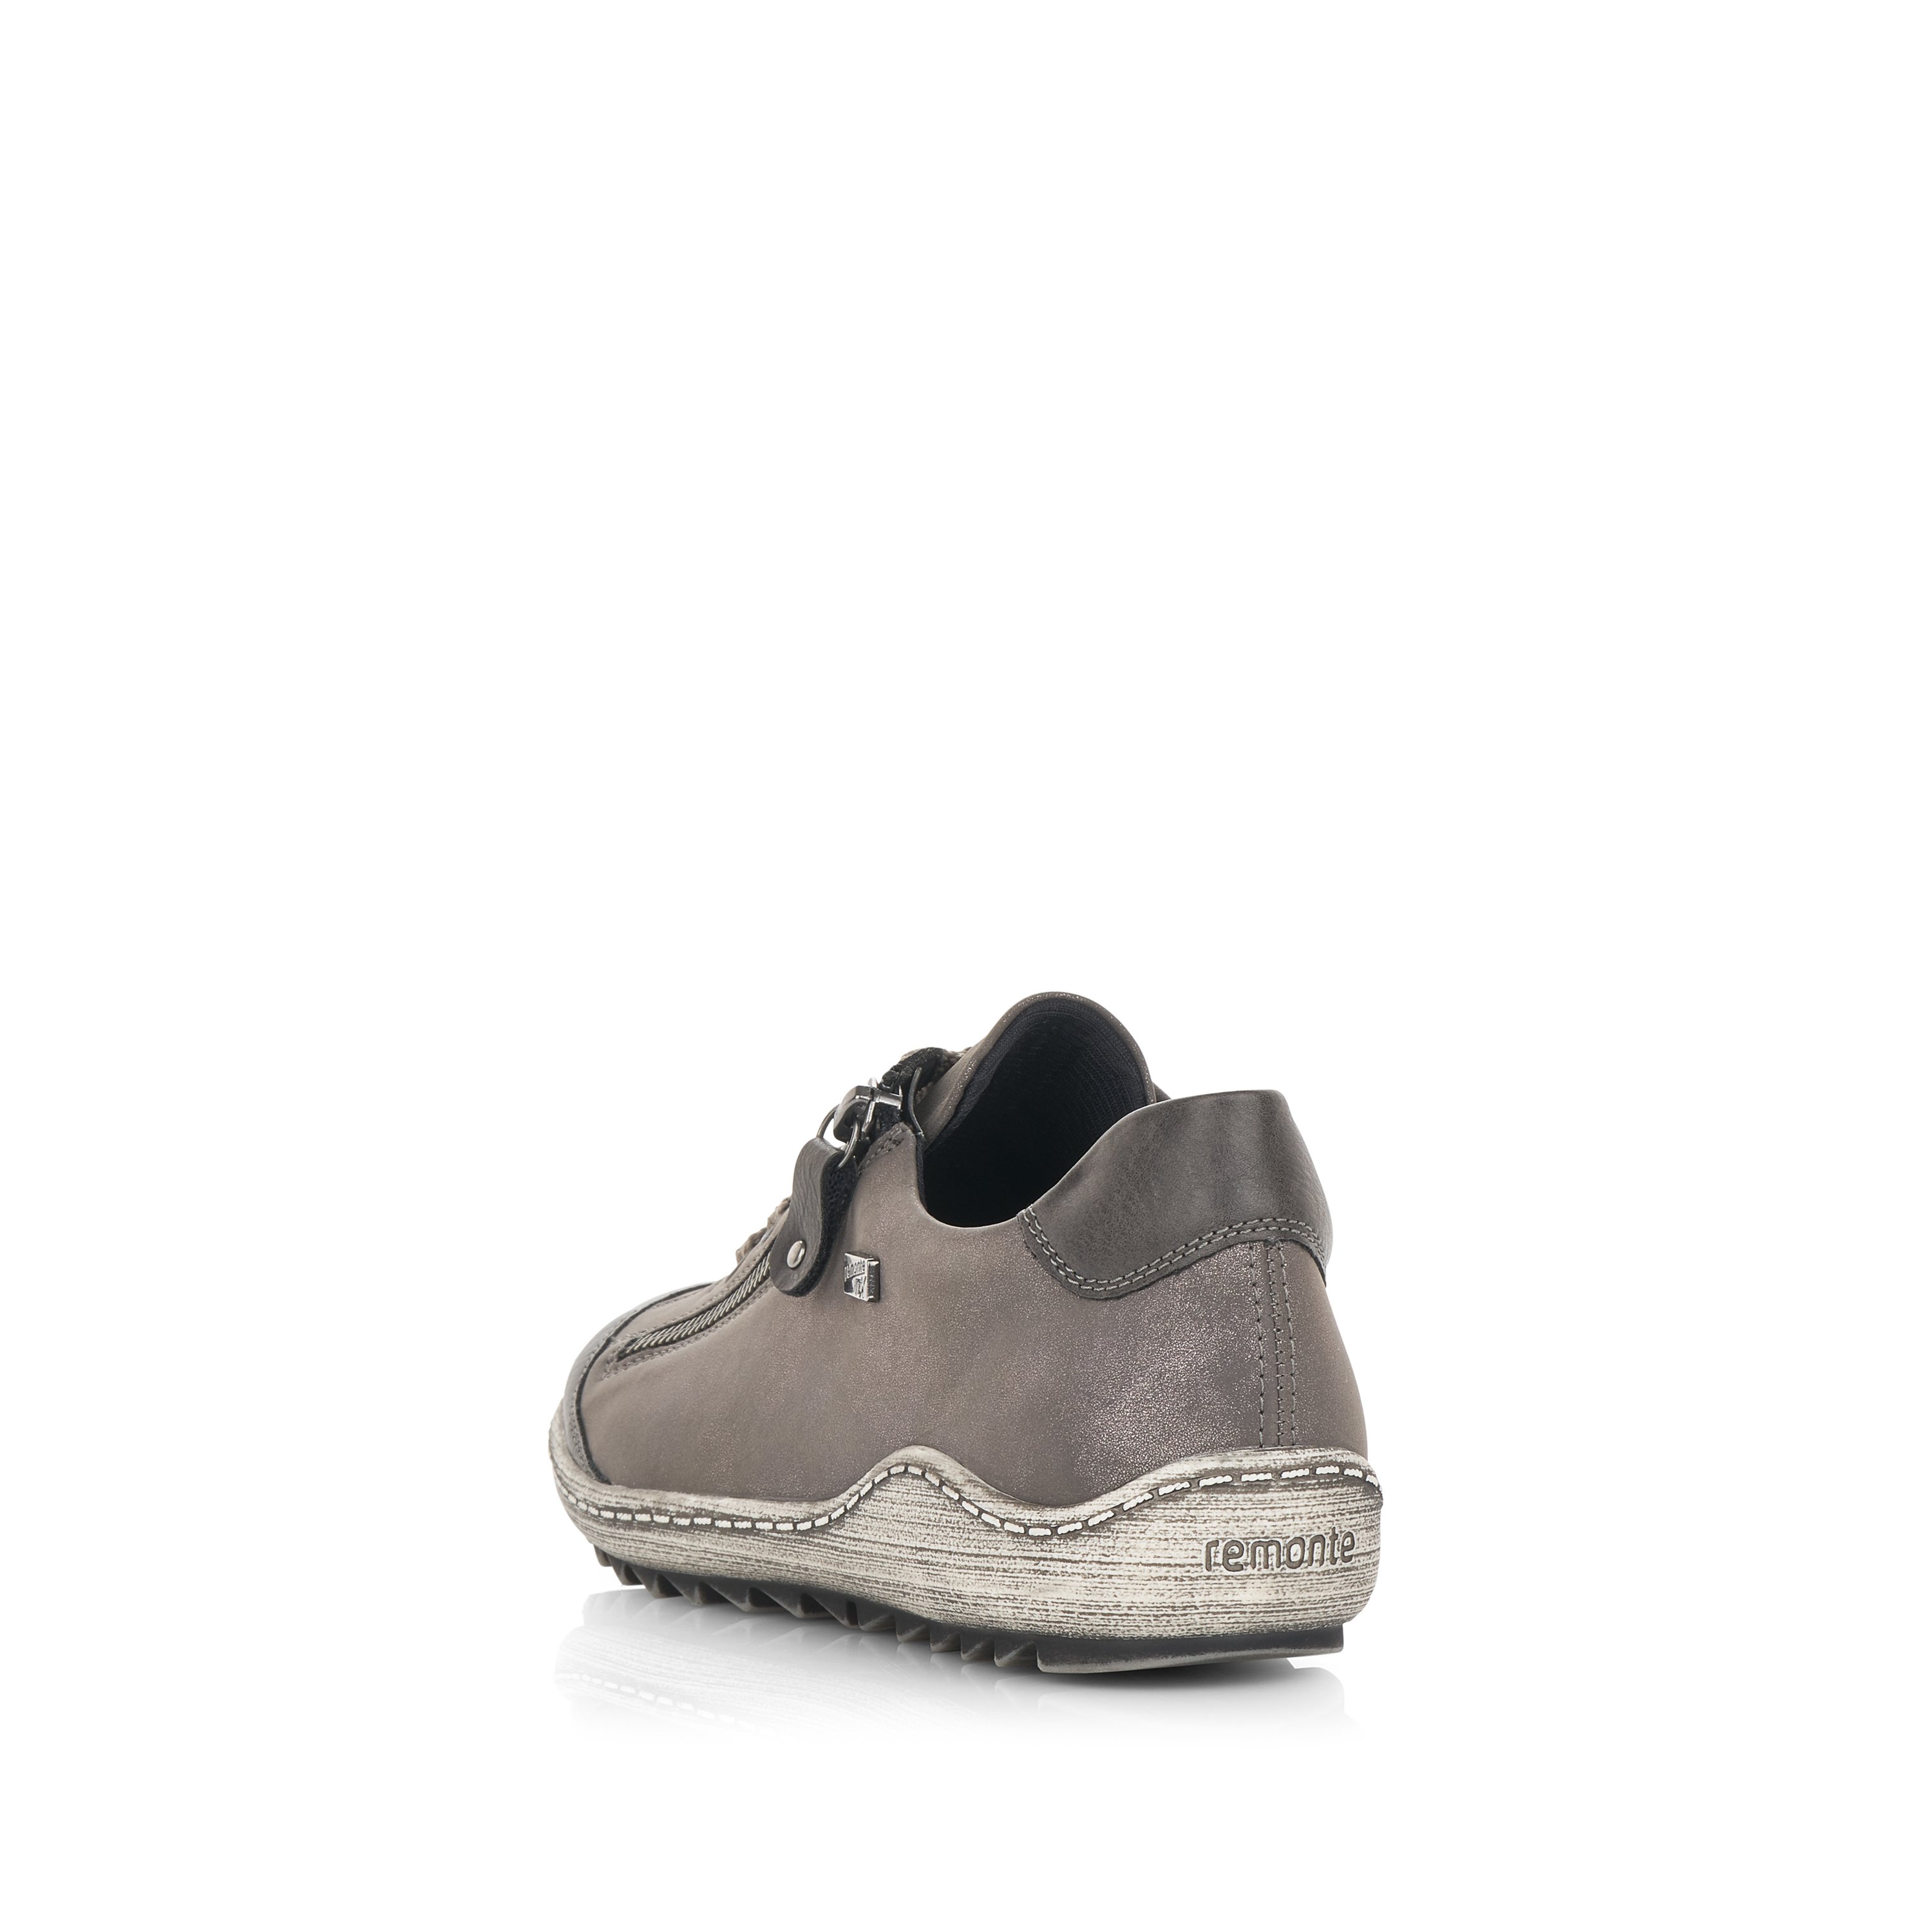 Silver grey remonte women´s lace-up shoes R1402-44 with flexible profile sole. Shoe from the back